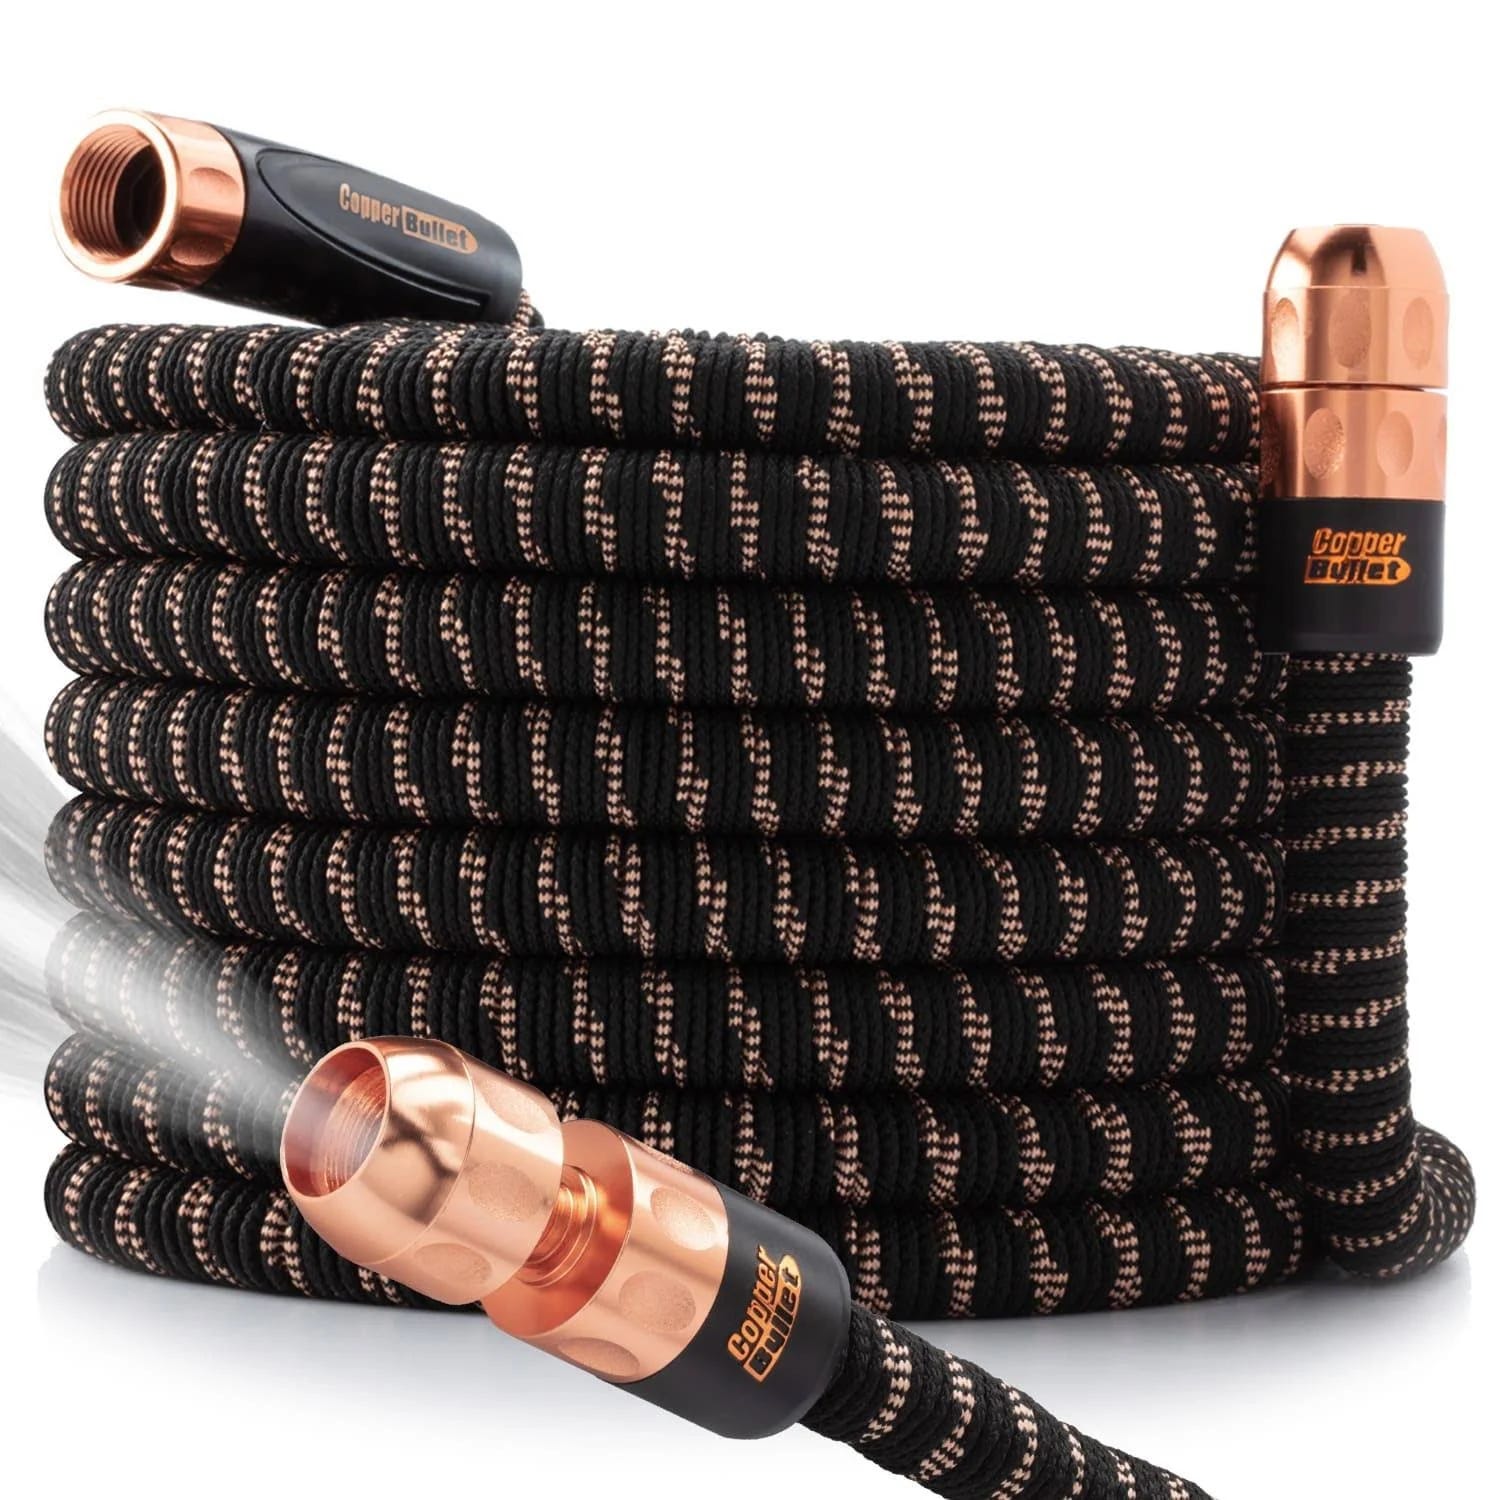 Expandable Lead-Free Hose with Tri-Force Inner Tube and Copper Bullet Technology | Image